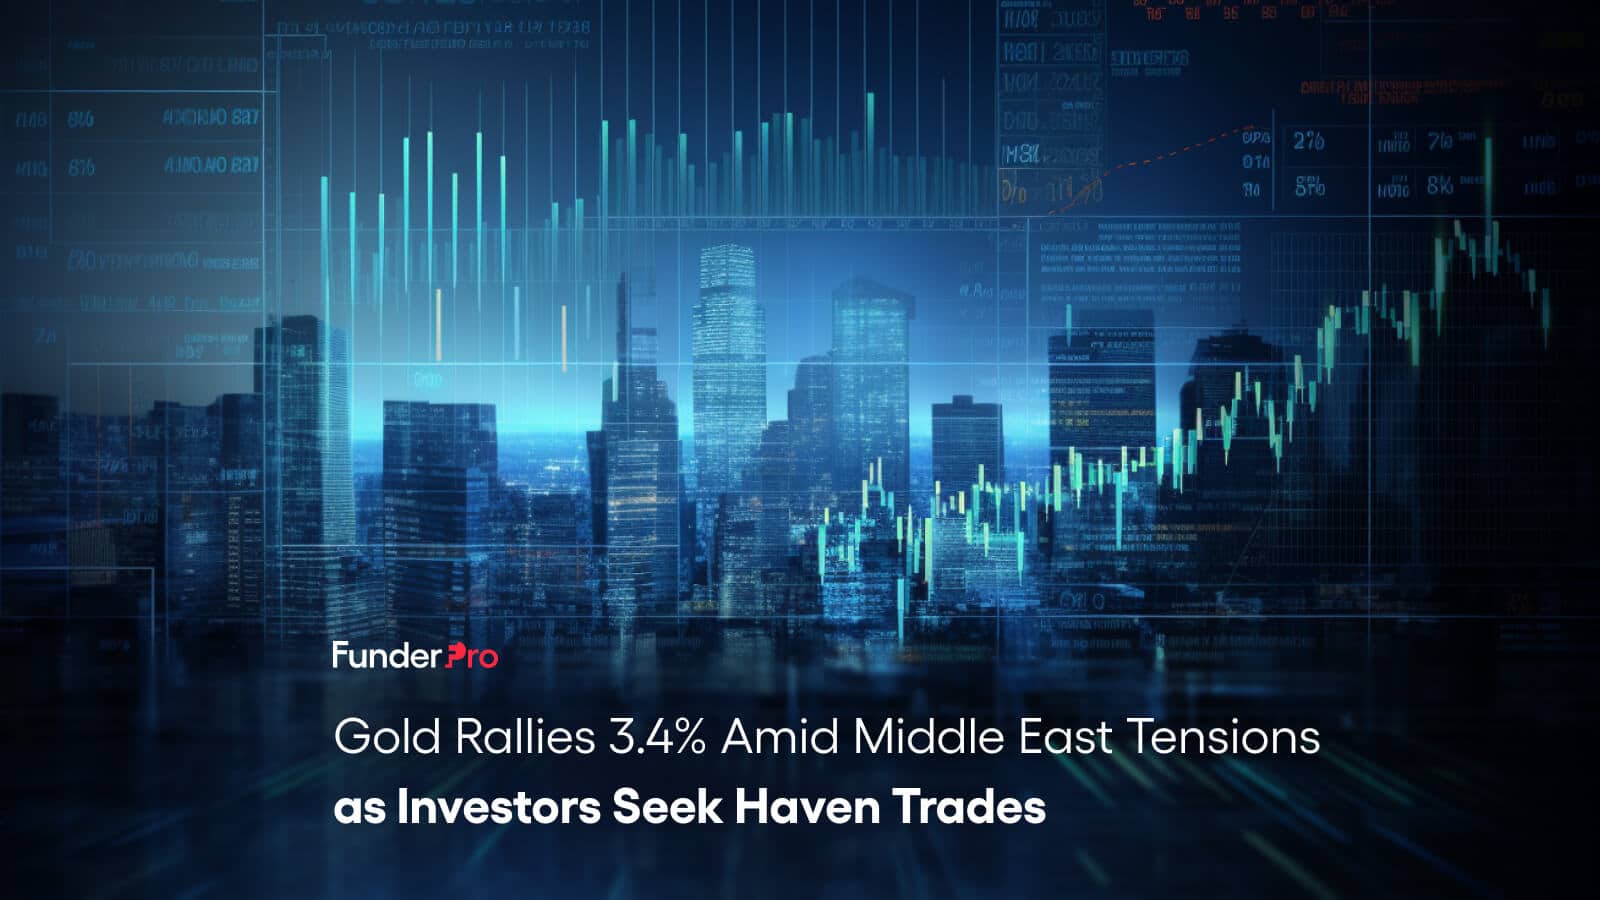 Gold Rallies 3.4% Amid Middle East Tensions as Investors Seek Haven Trades